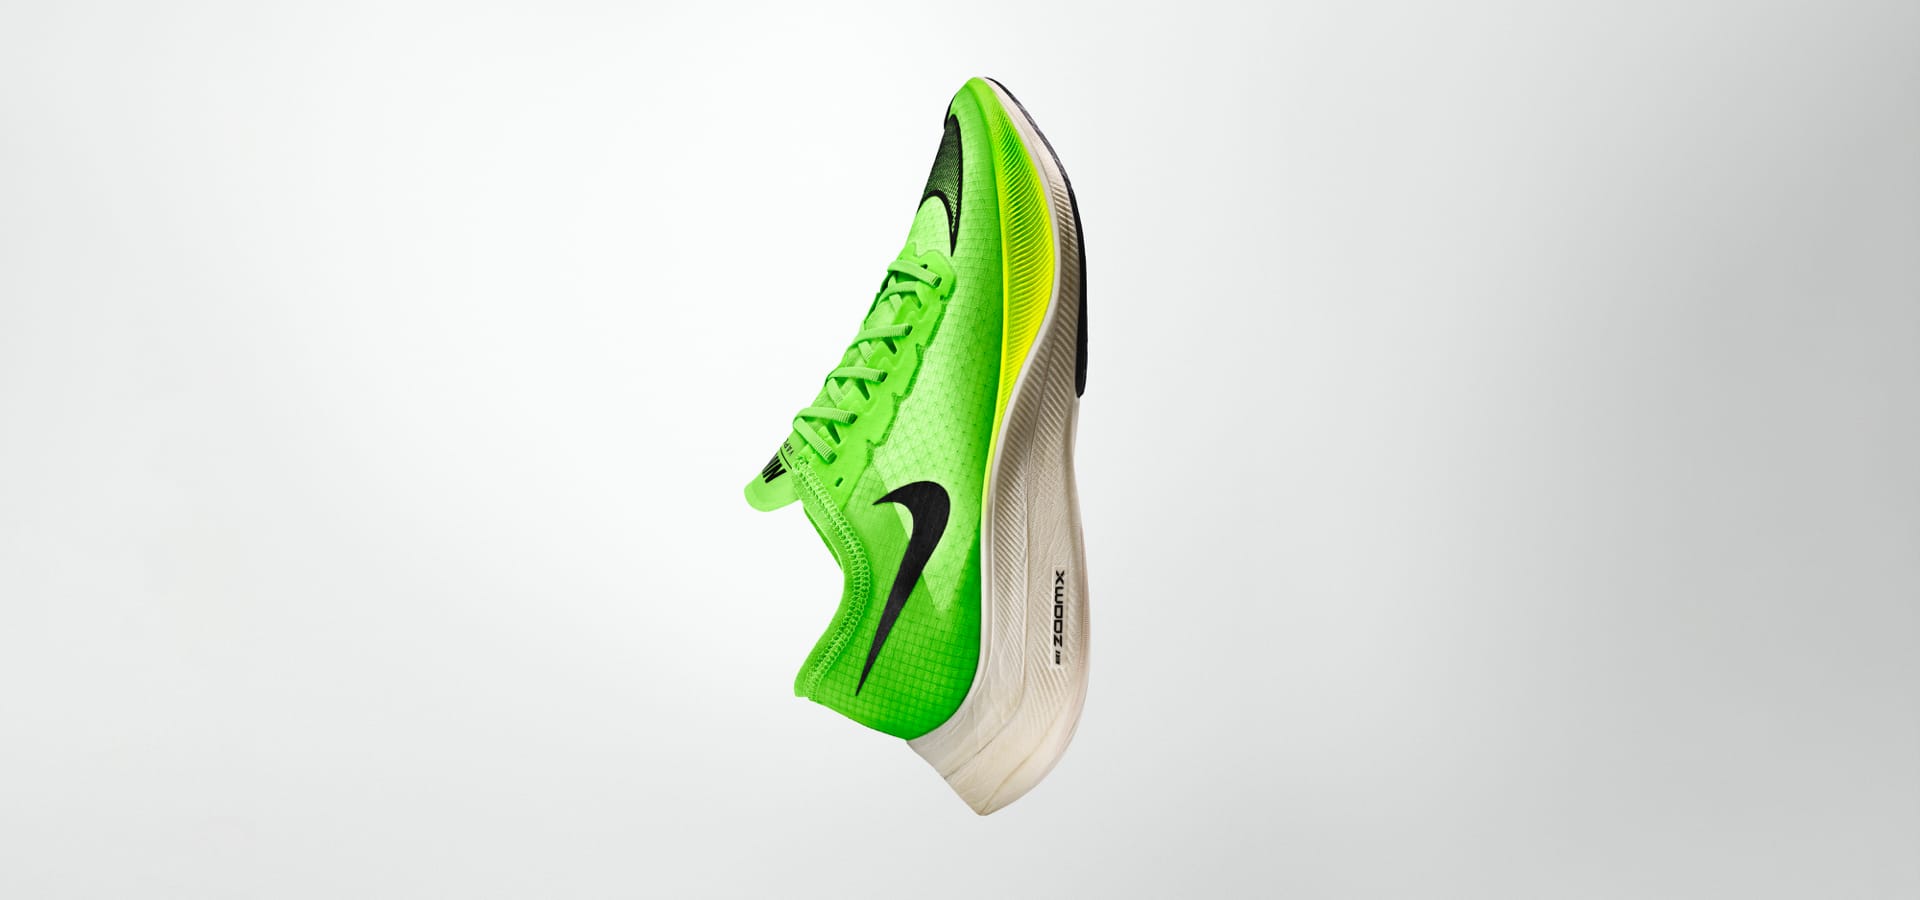 Nike Vaporfly. Featuring the new Vaporfly NEXT%. Nike MY